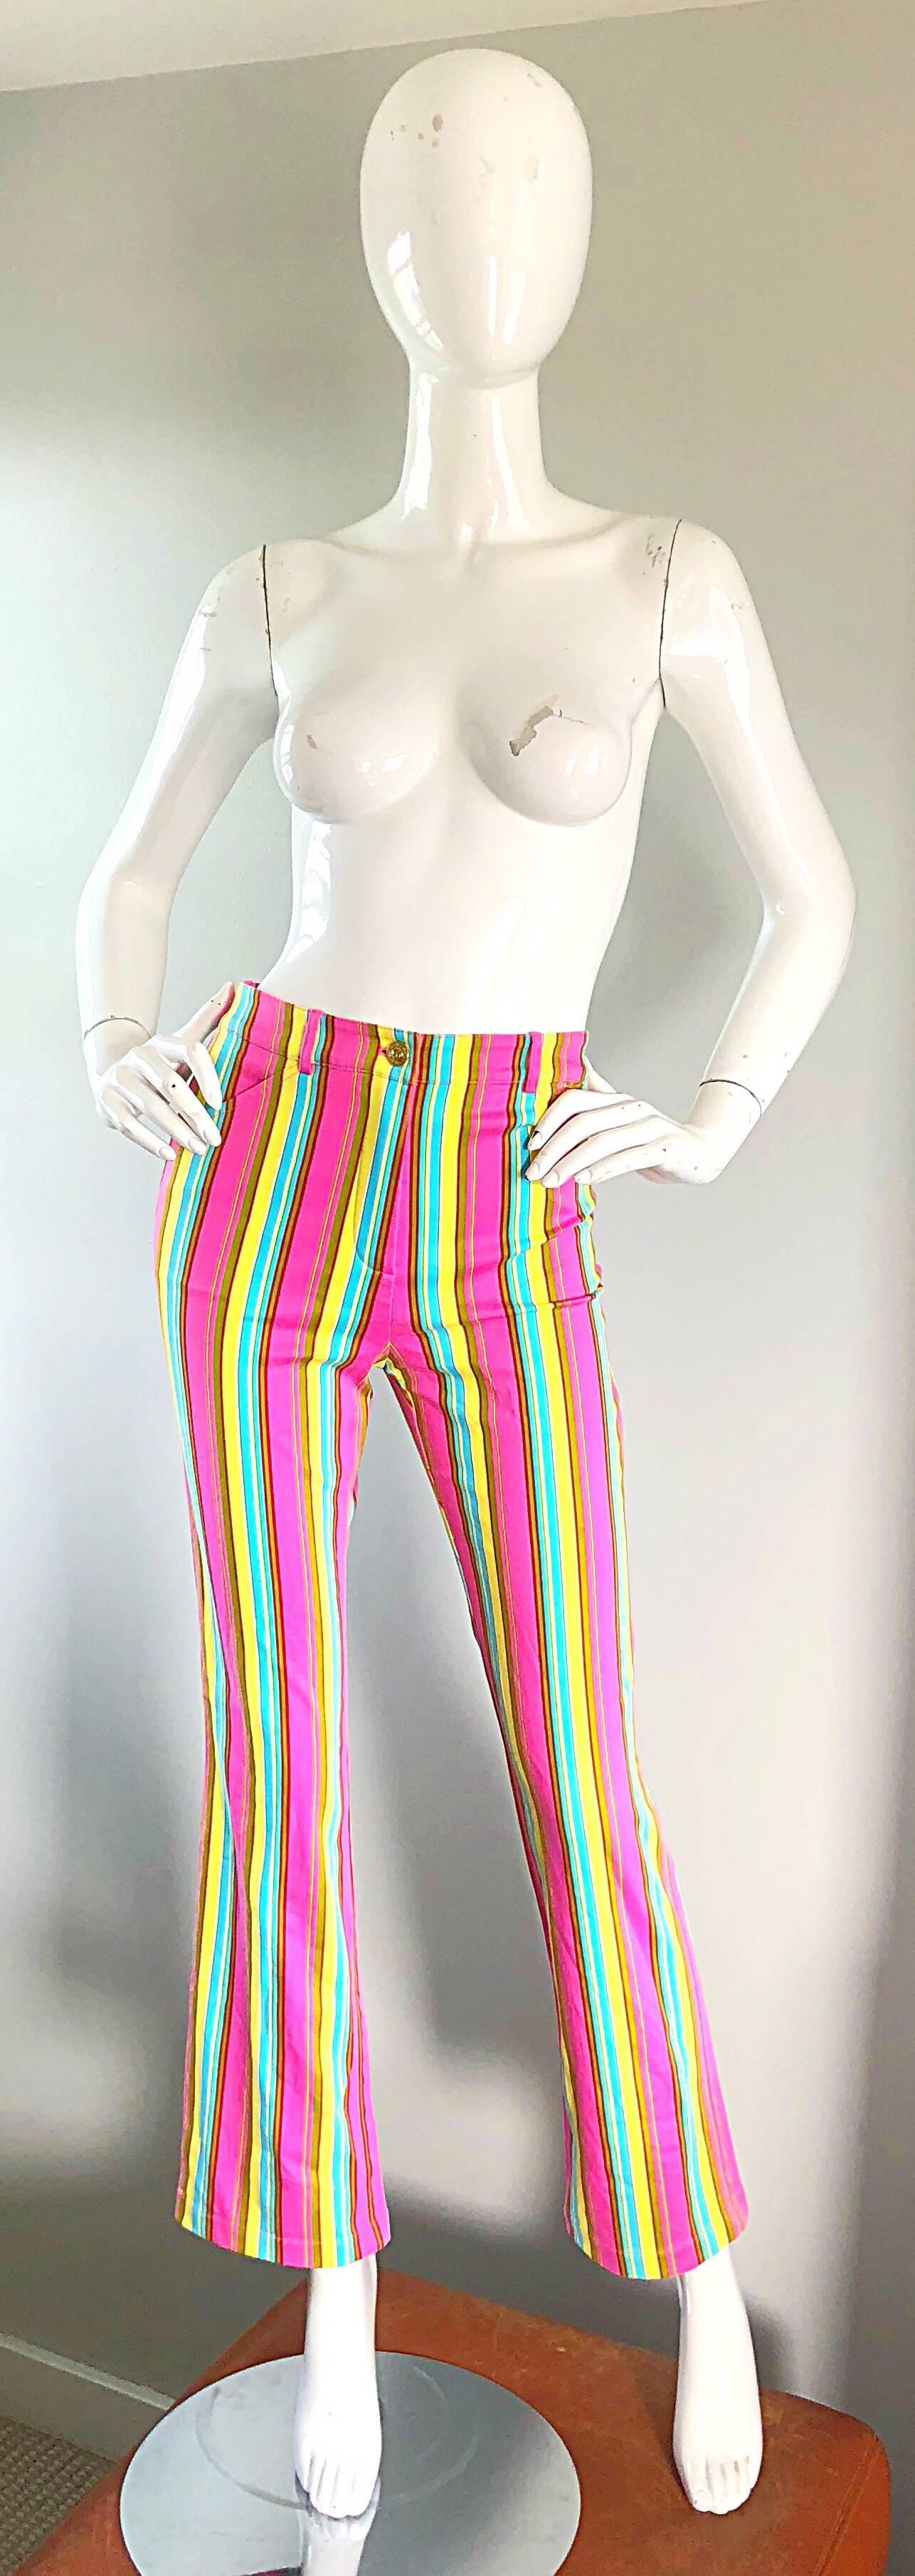 Amazing 1990s ST JOHN by MARIE GRAY high waisted striped bootcut trousers! Features vertical stripes in vibrant colors of hot pink, turquoise blue, light brown, and white--the ULTIMATE in a flattering fit! Current fashionable high waisted, with a